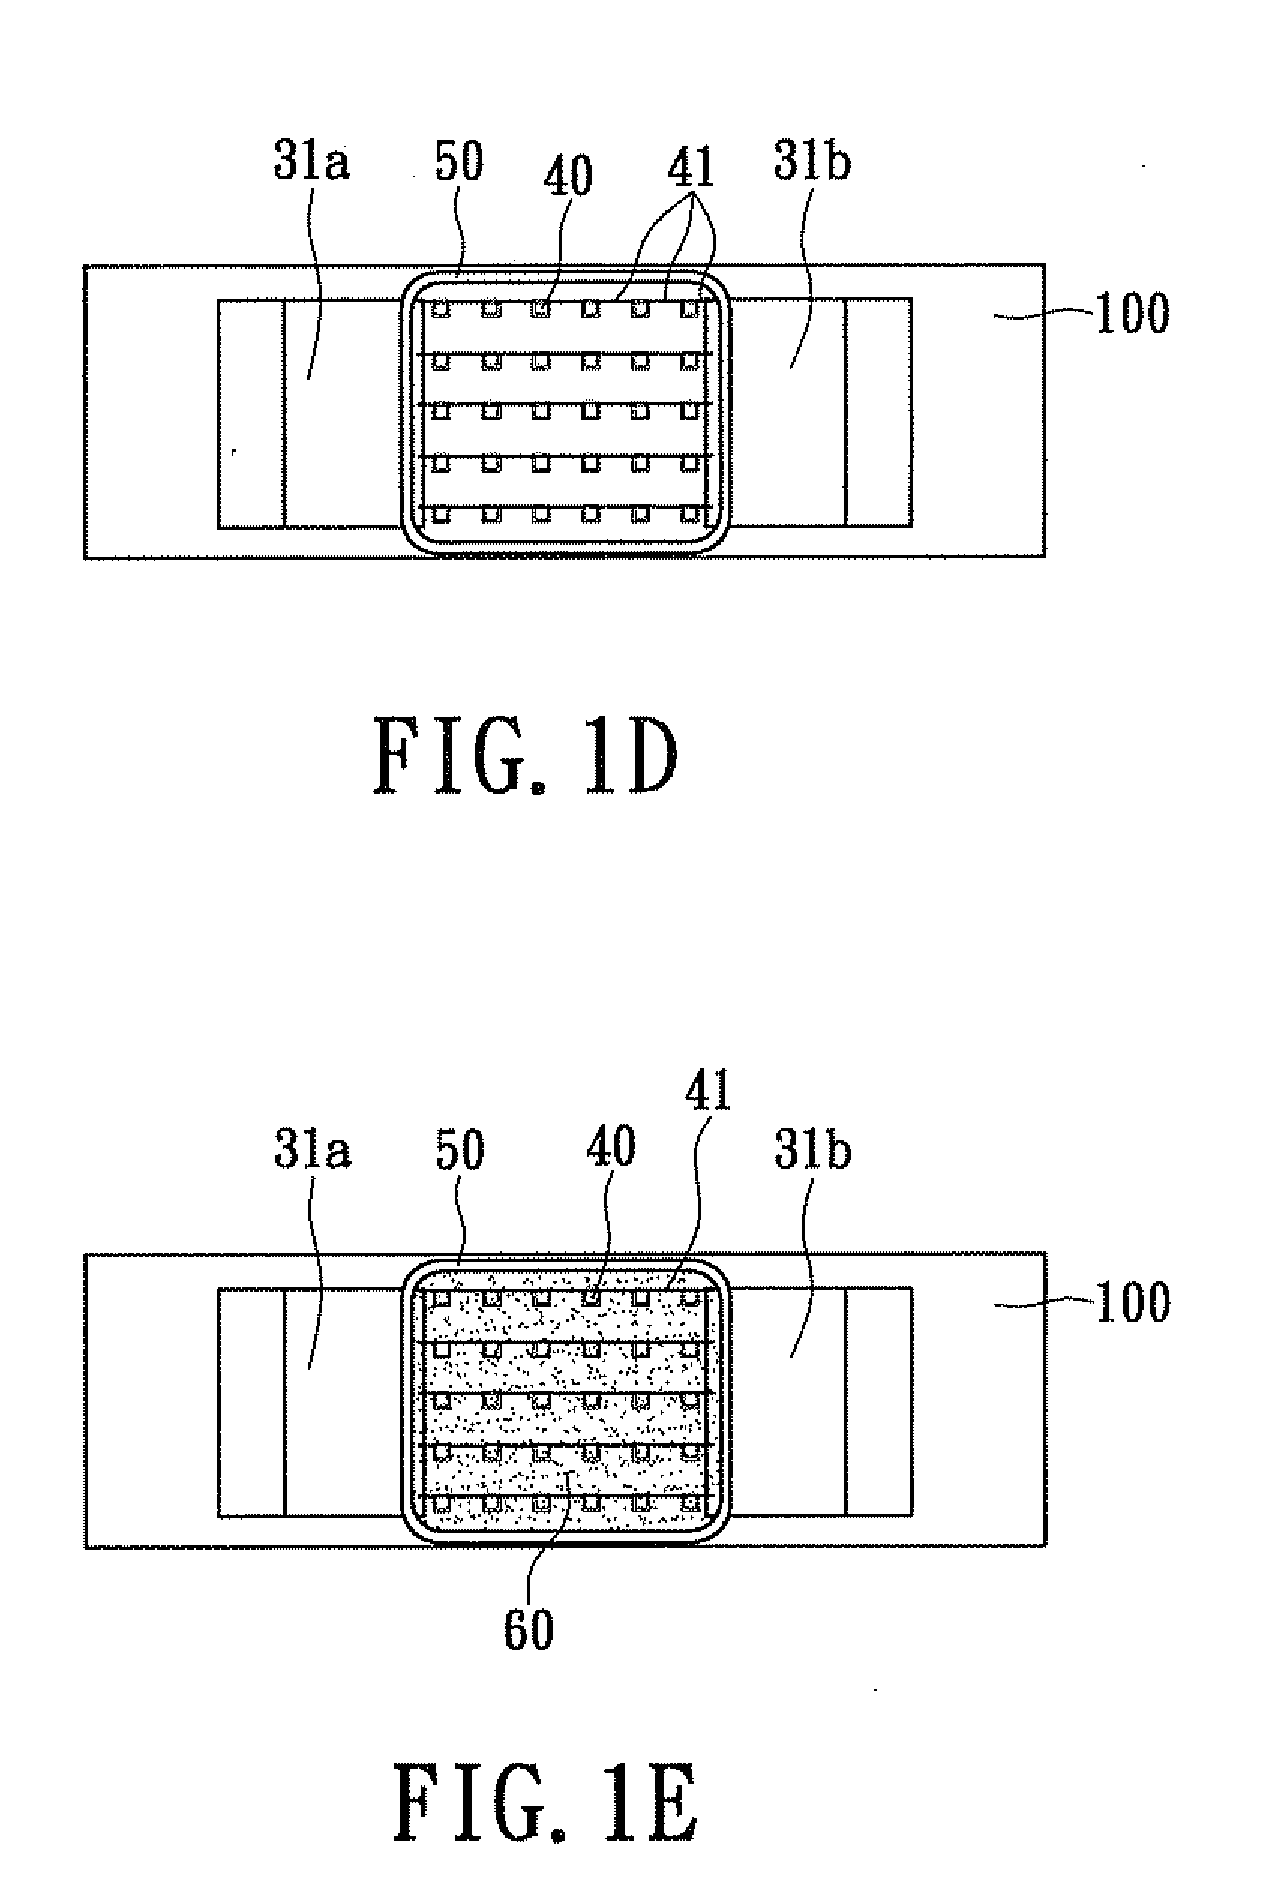 LED illuminator module with high heat-dissipating efficiency and manufacturing method therefor